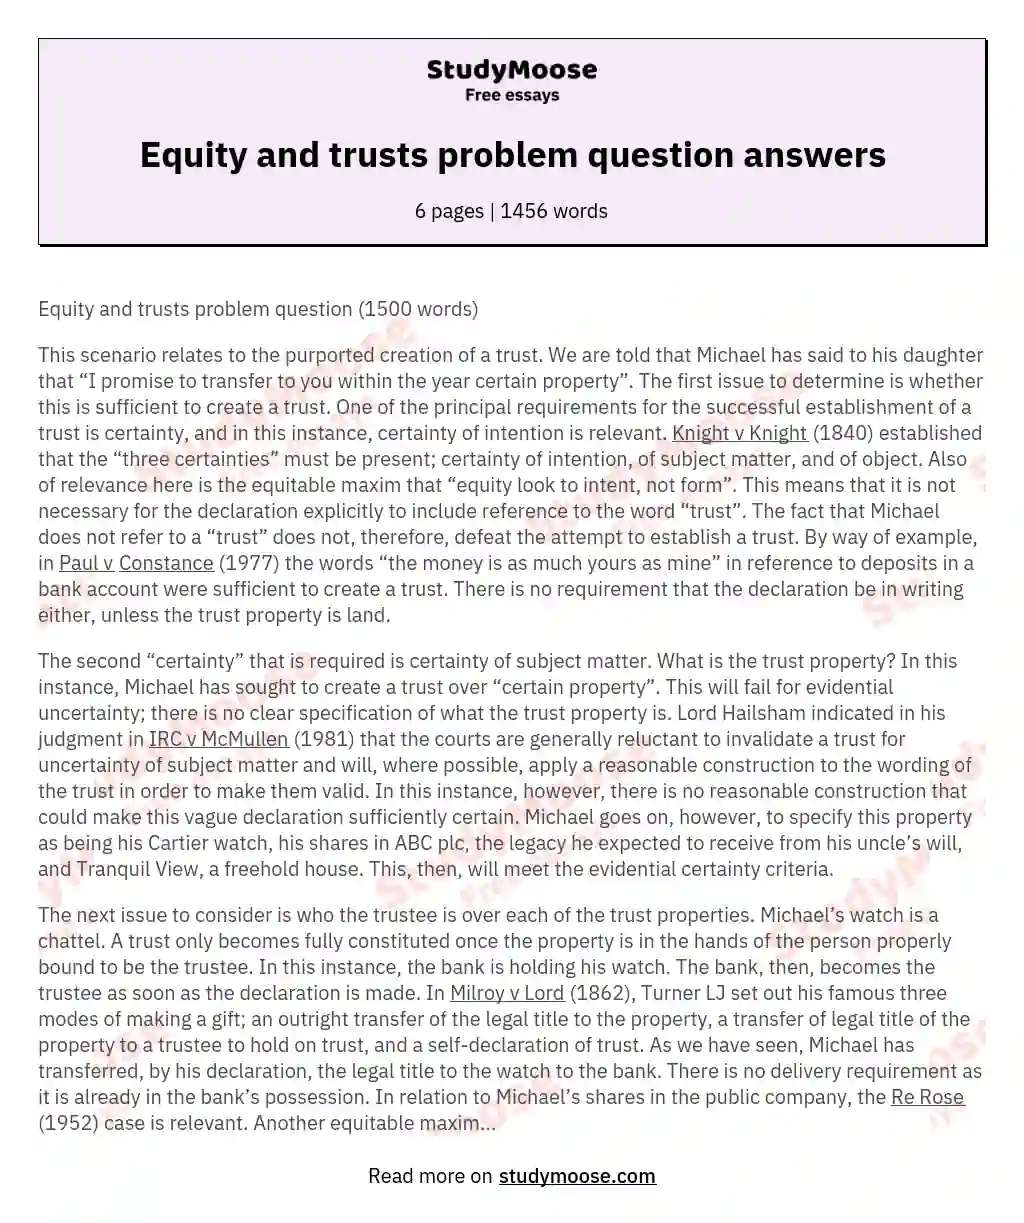 Equity and trusts problem question answers essay